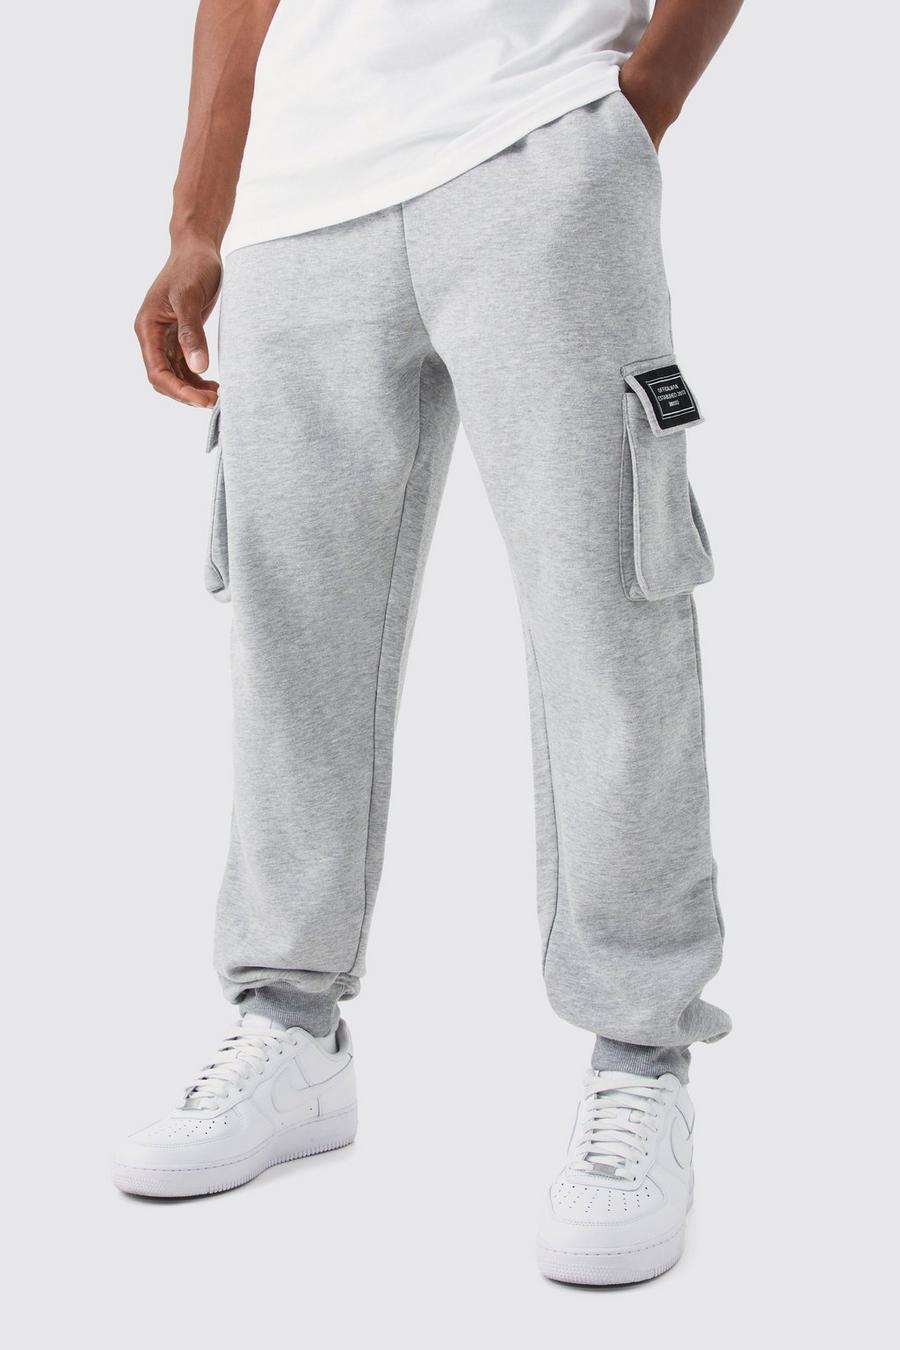 Grey marl Jersey Knit Cargo Sweatpant With Woven Tab